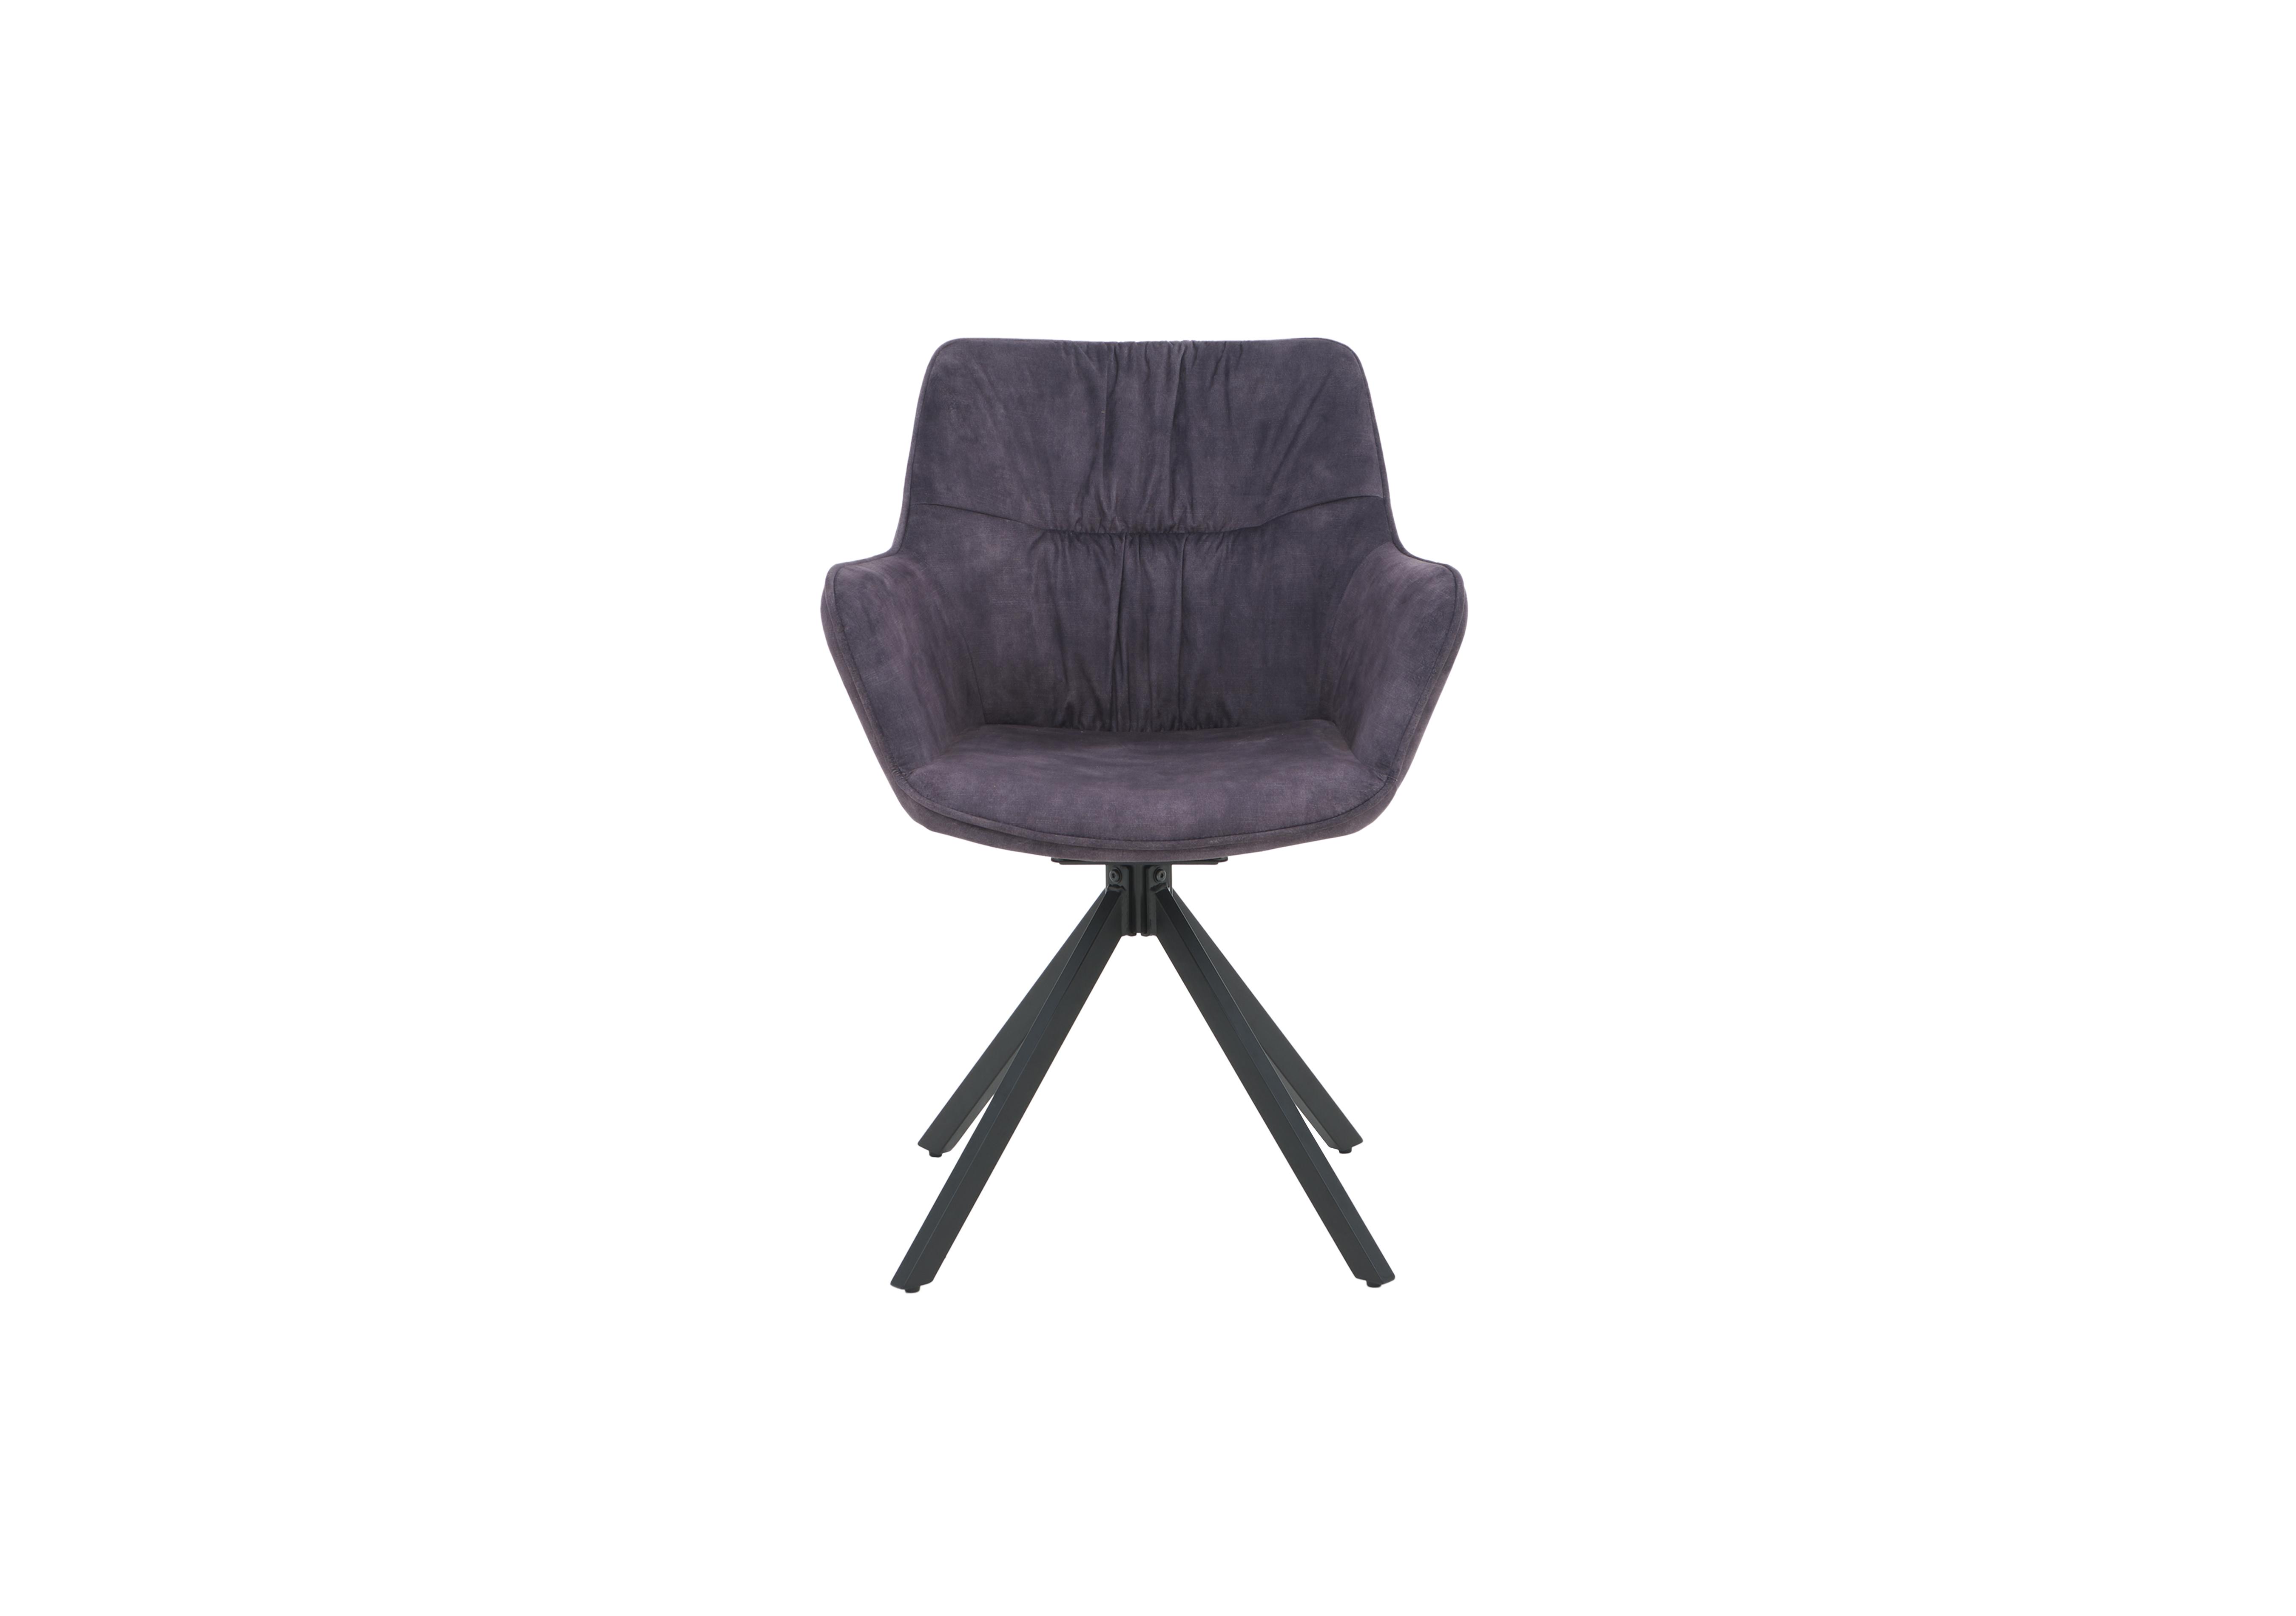 Marvel Black Swivel Dining Chair in Charcoal on Furniture Village